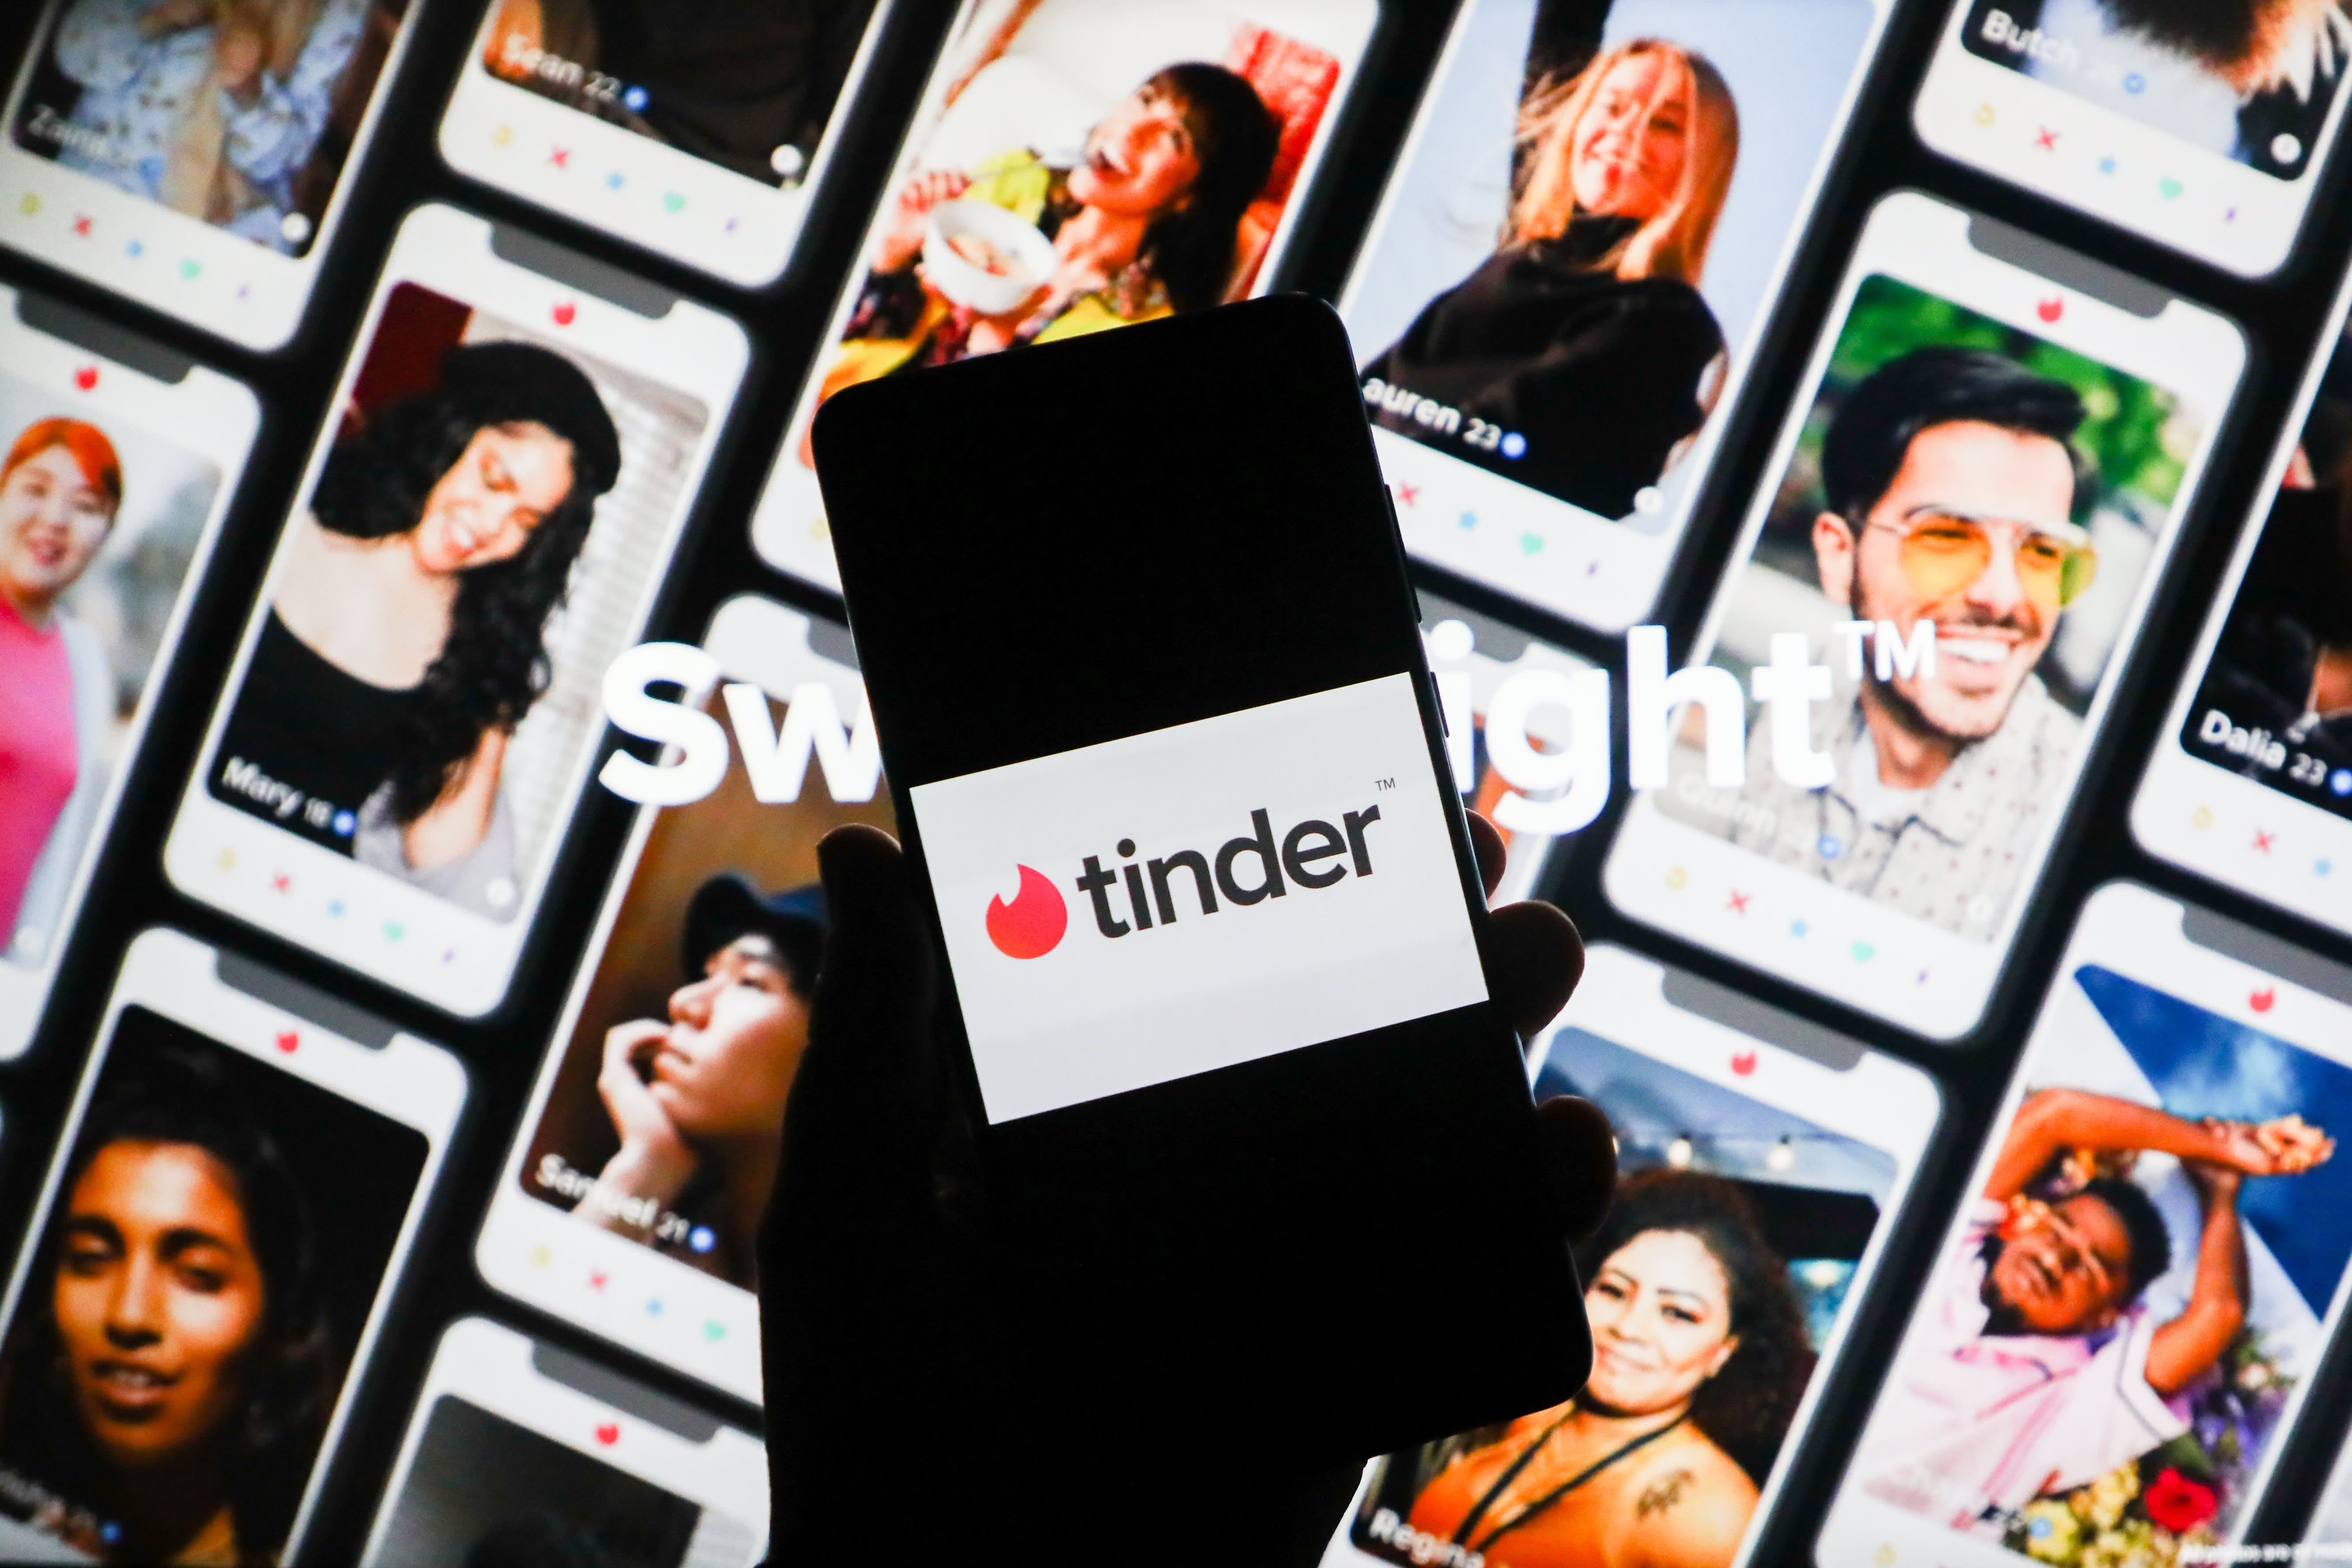 Match Group shares tin  rally 30% acknowledgment  to a betterment   successful  Tinder, says BTIG